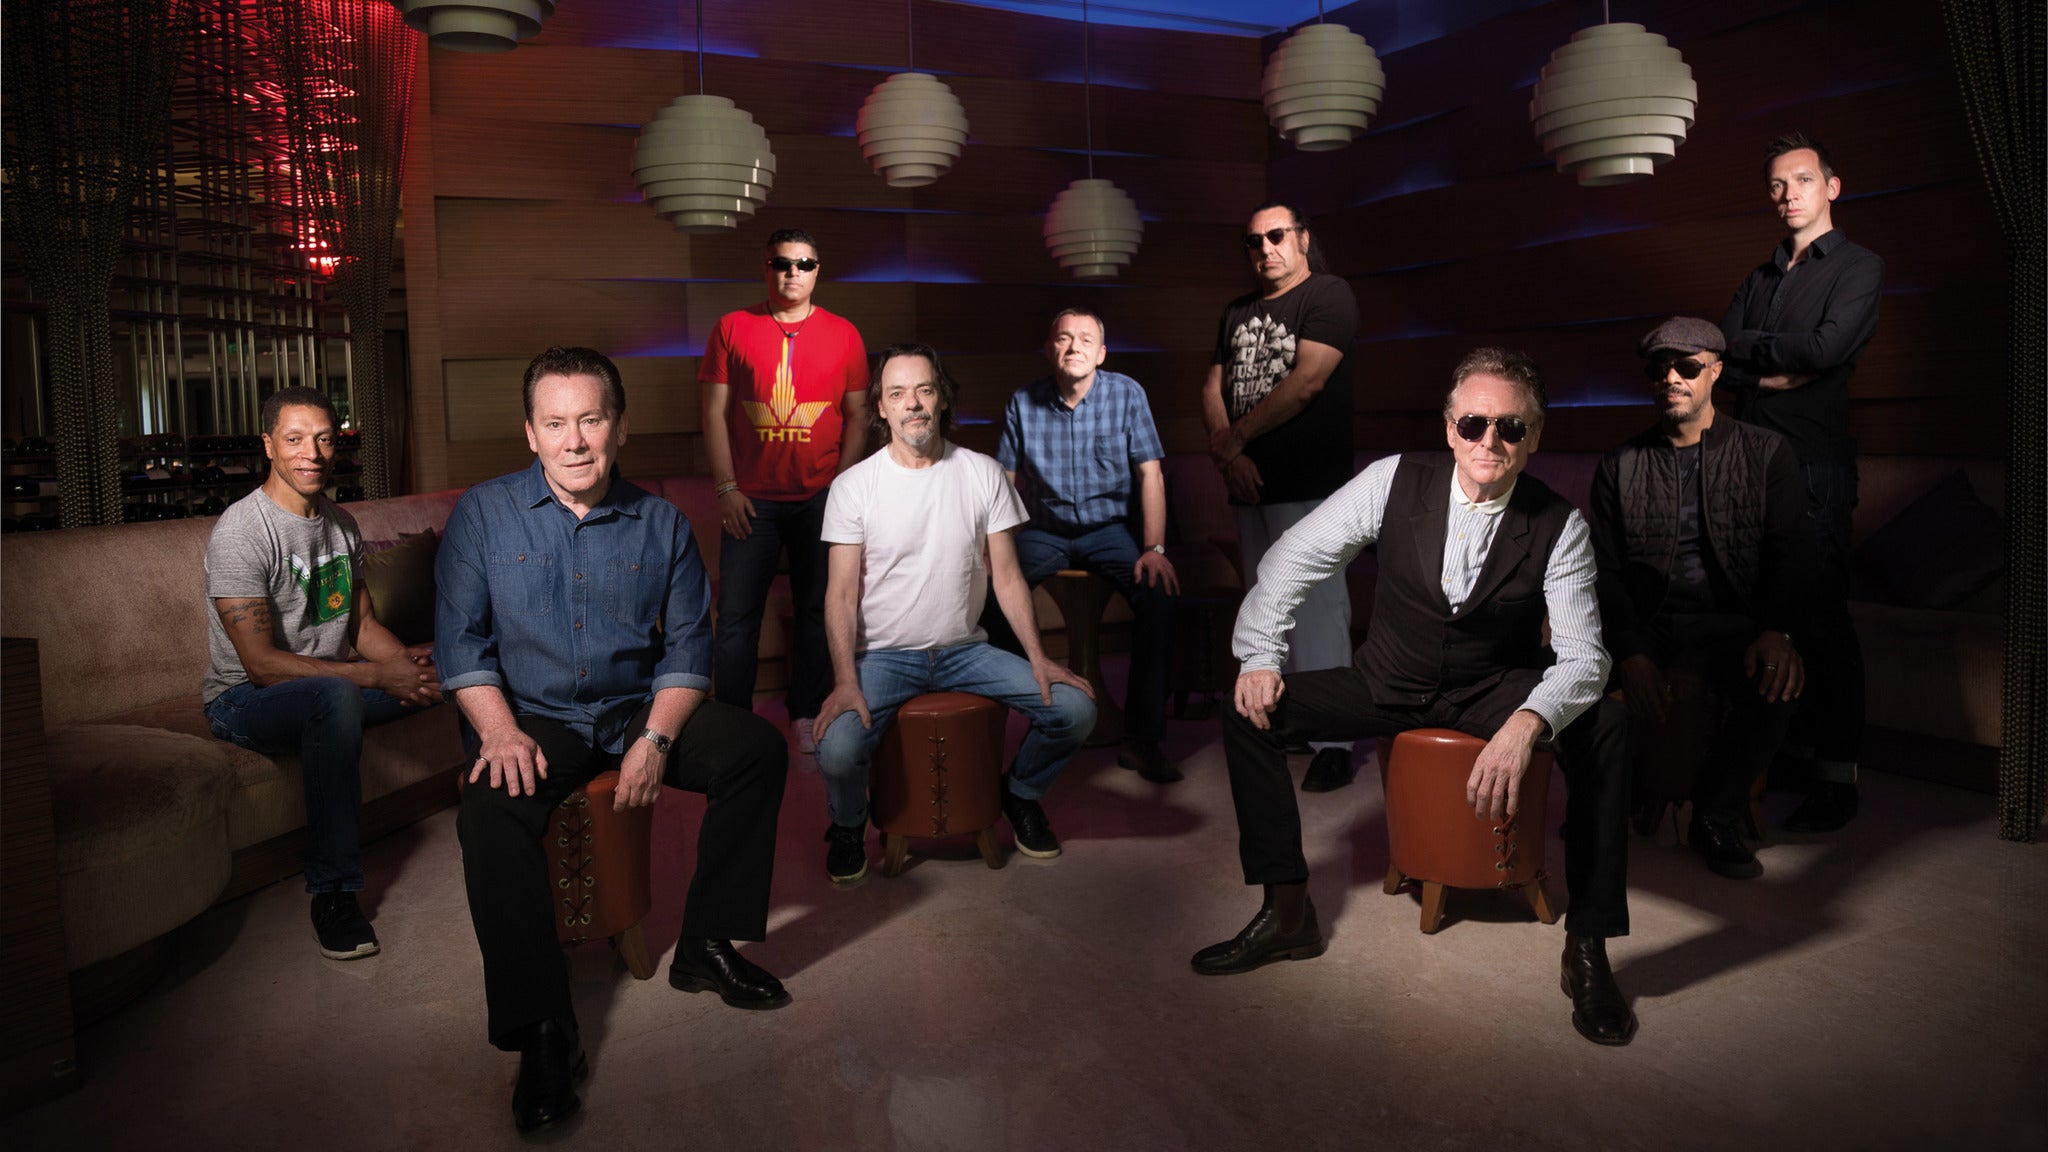 Image used with permission from Ticketmaster | UB40 Featuring Ali Campbell tickets